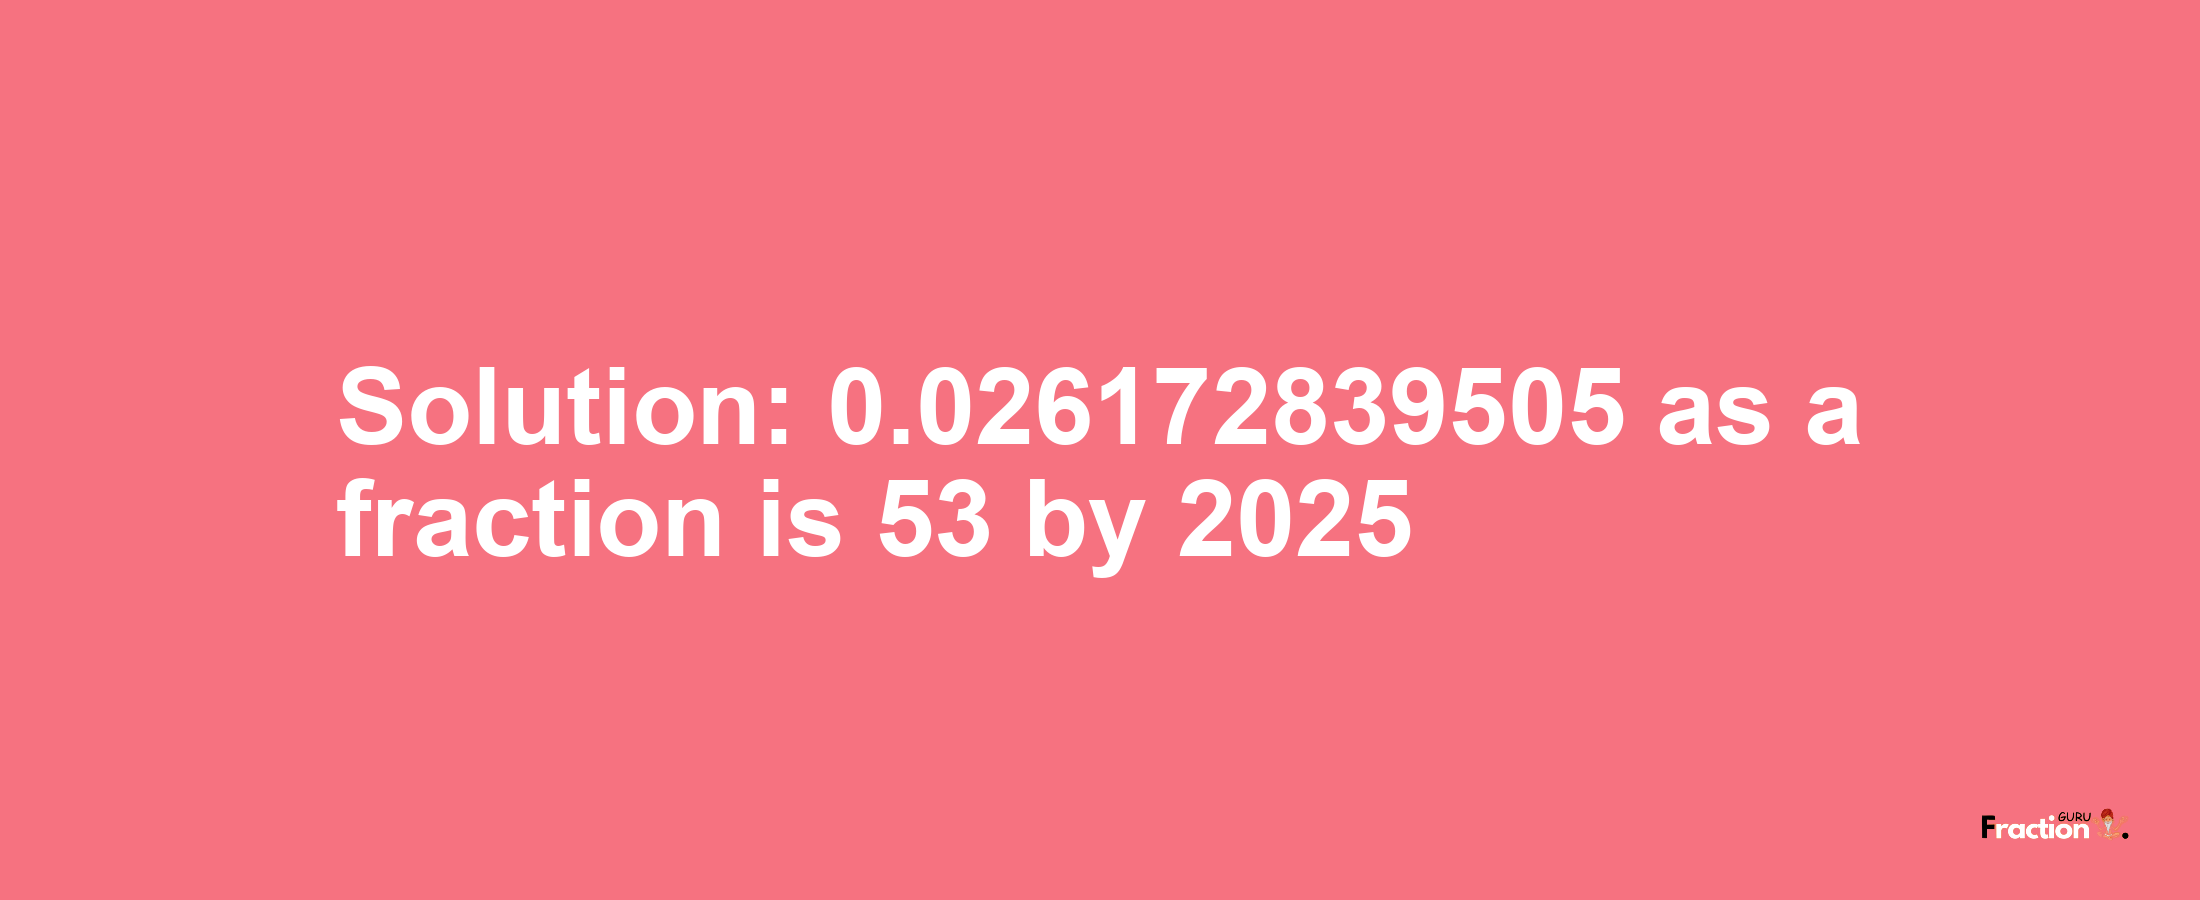 Solution:0.026172839505 as a fraction is 53/2025